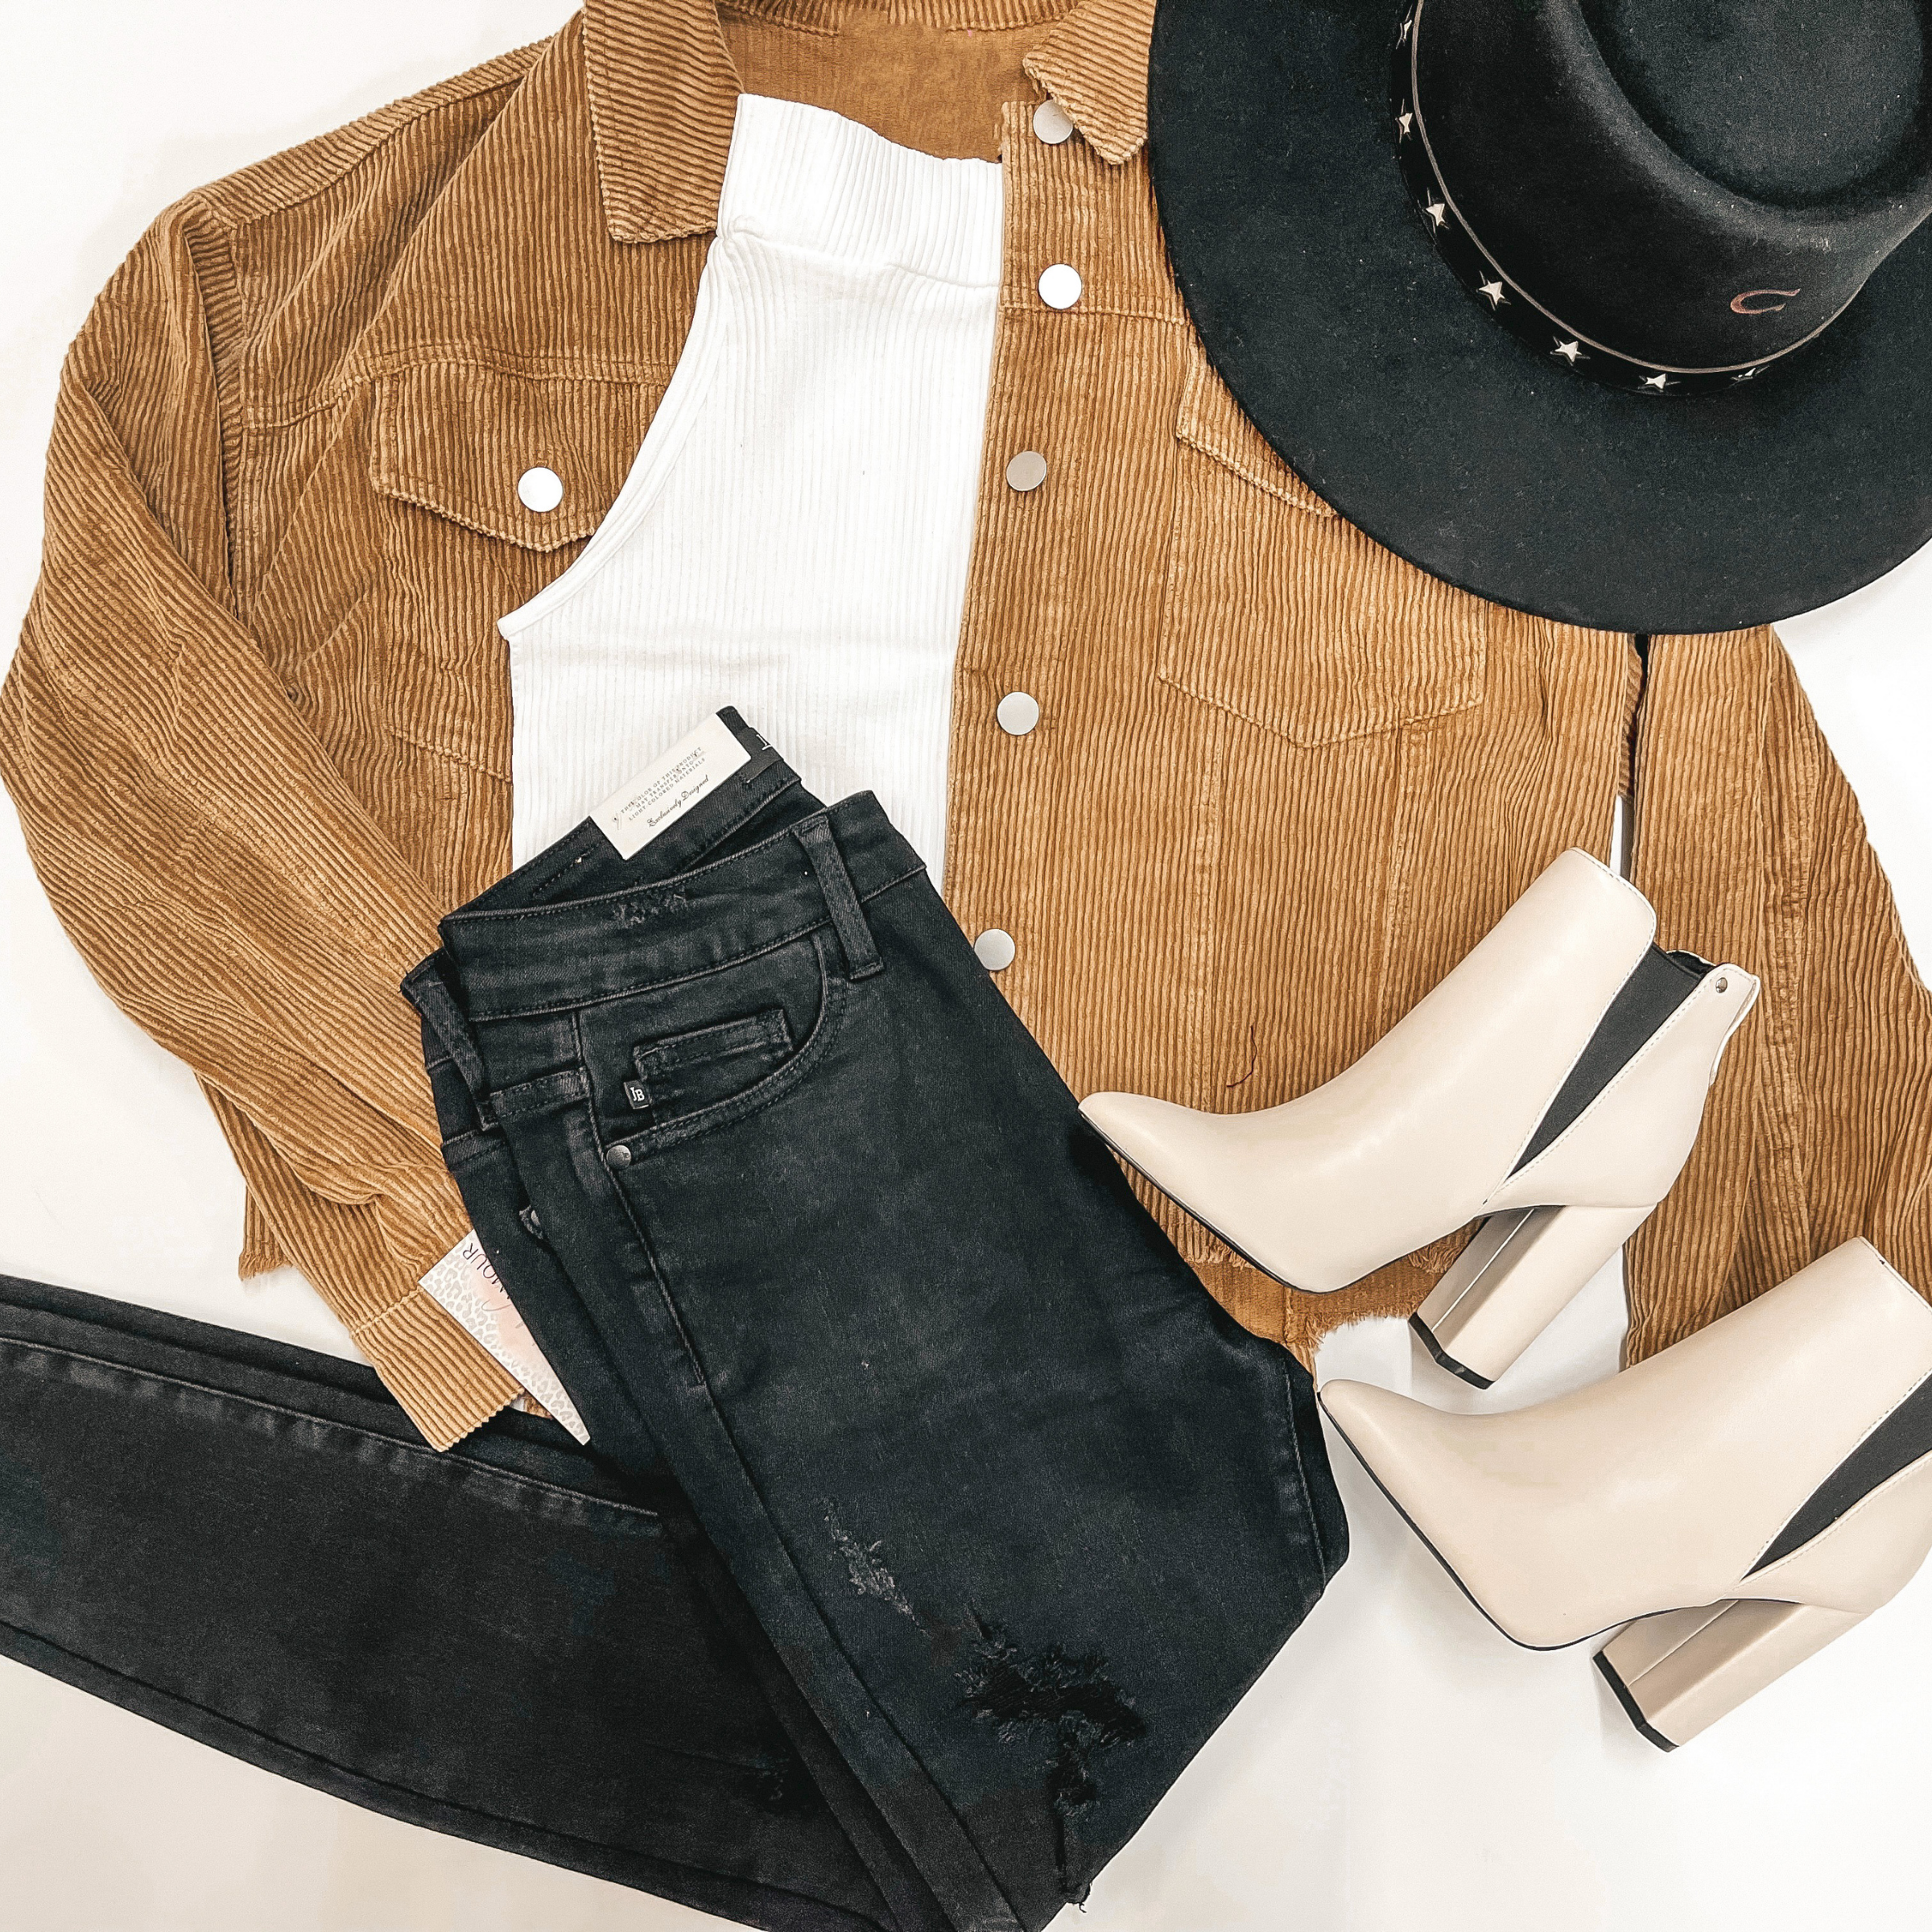 Camel brown corduroy jacket with silver buttons and front pockets. The jacket has a white seamless top underneath, black skinny jeans, and black Charlie 1 Horse hat.